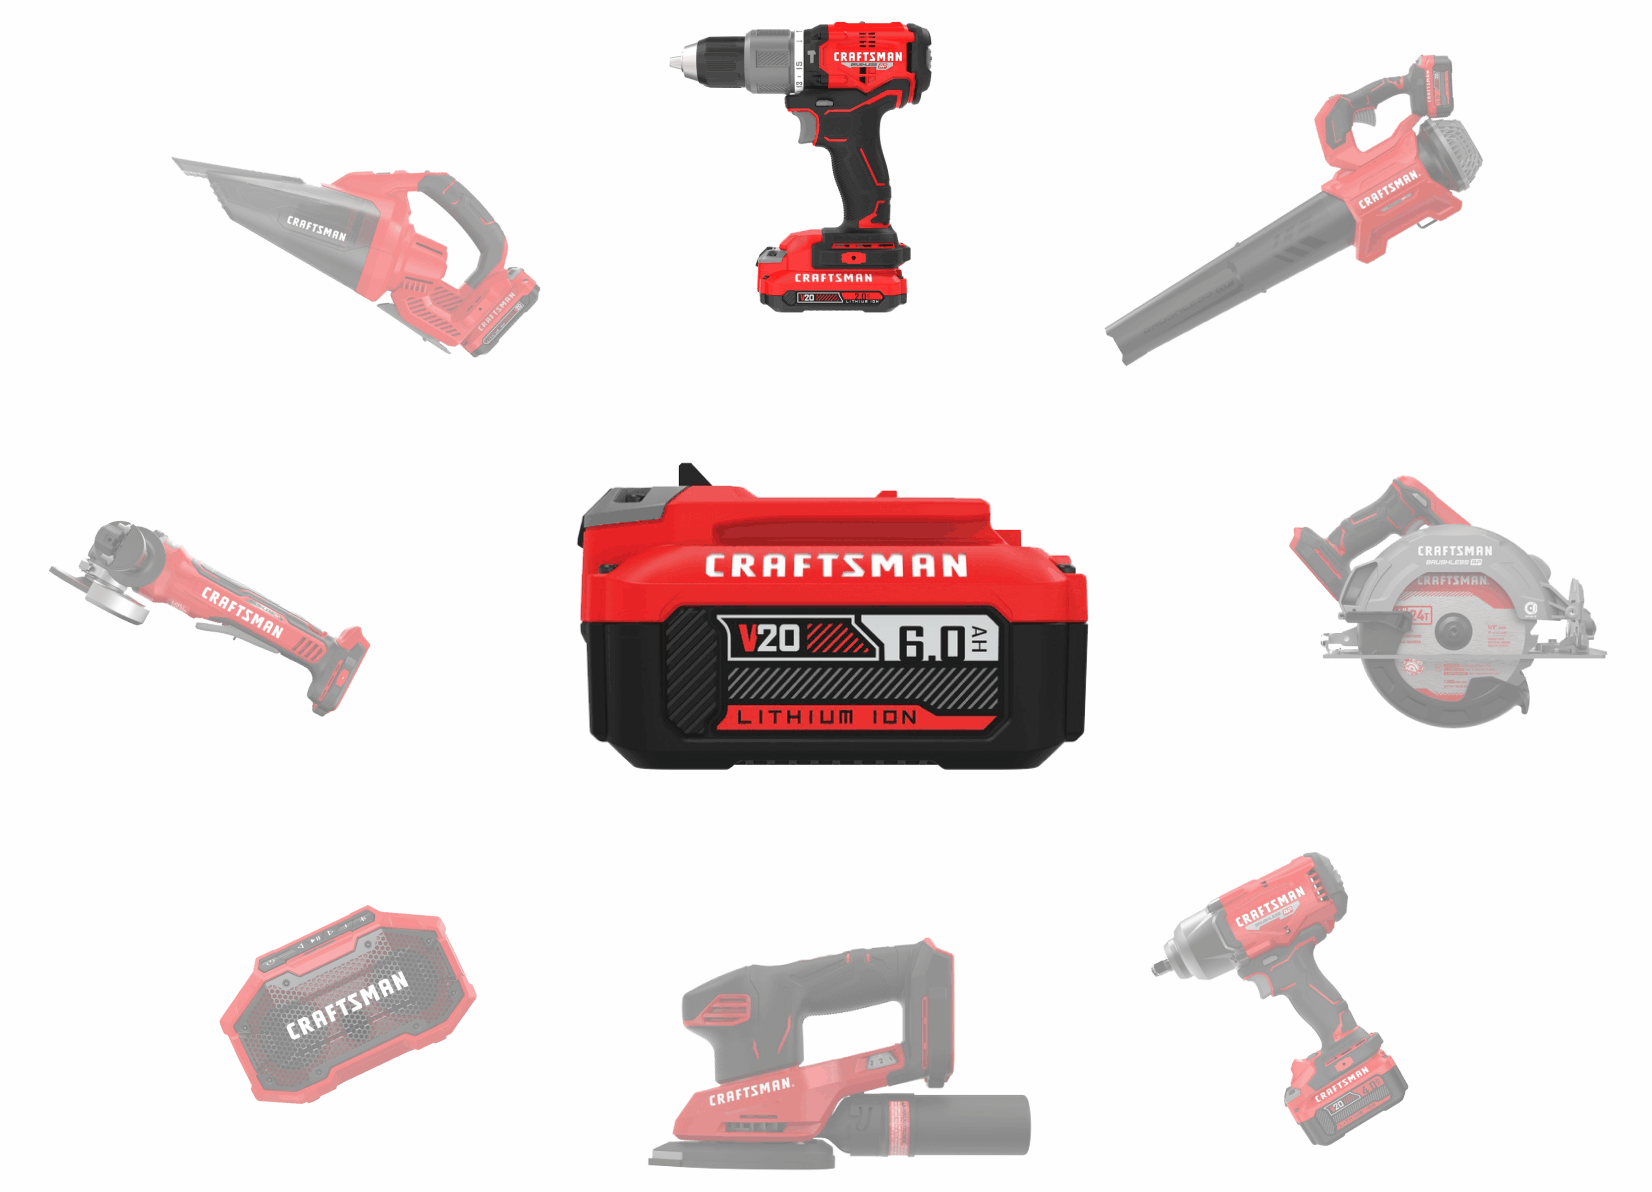 V20* 1/2 in Drive Brushless Cordless Impact Wrench CRAFTSMAN